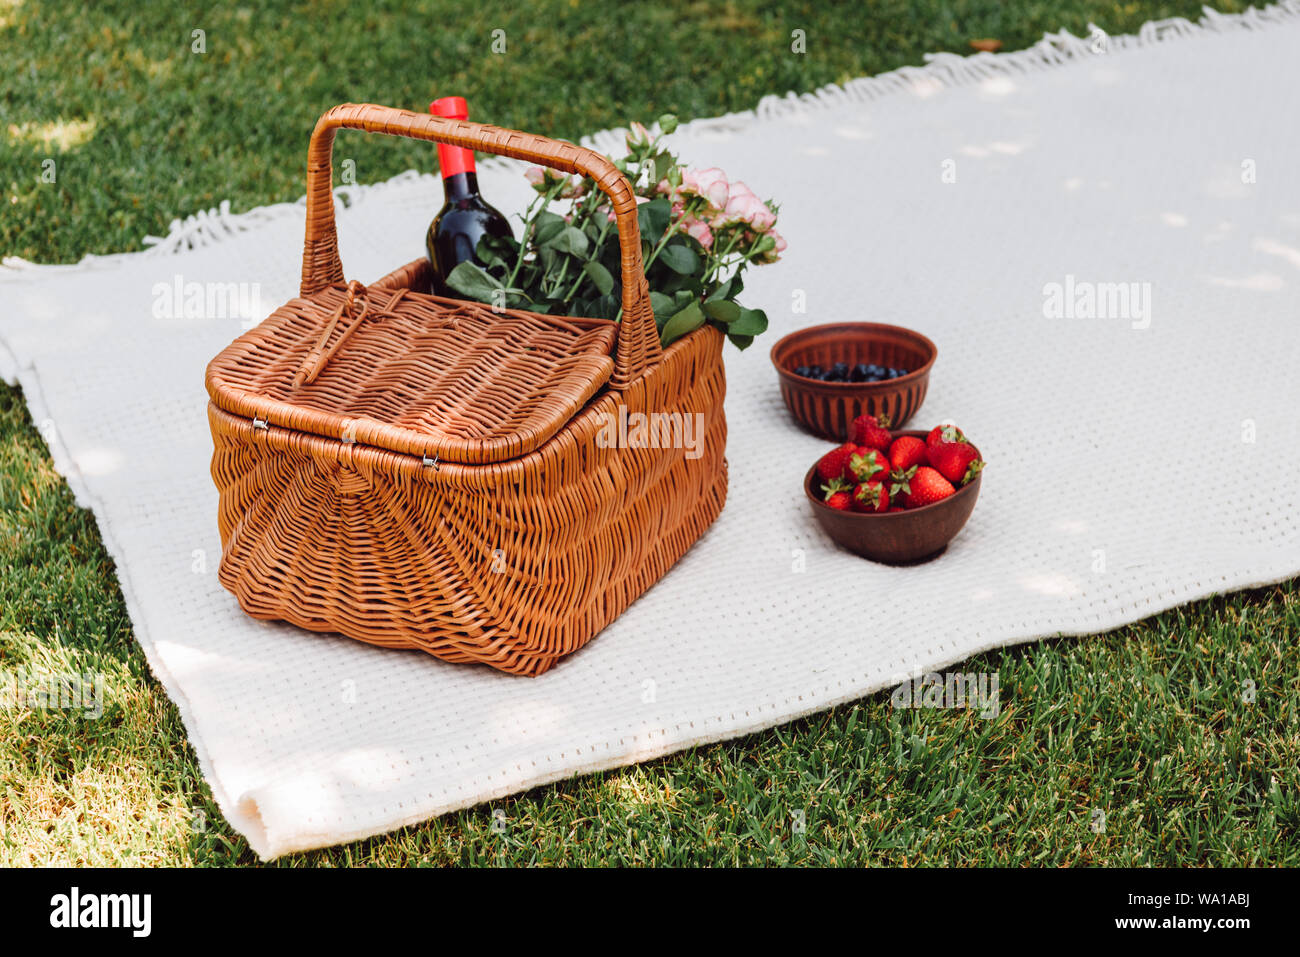 wicker basket with roses and bottle of wine on white blanket near strawberries in shadow in garden Stock Photo